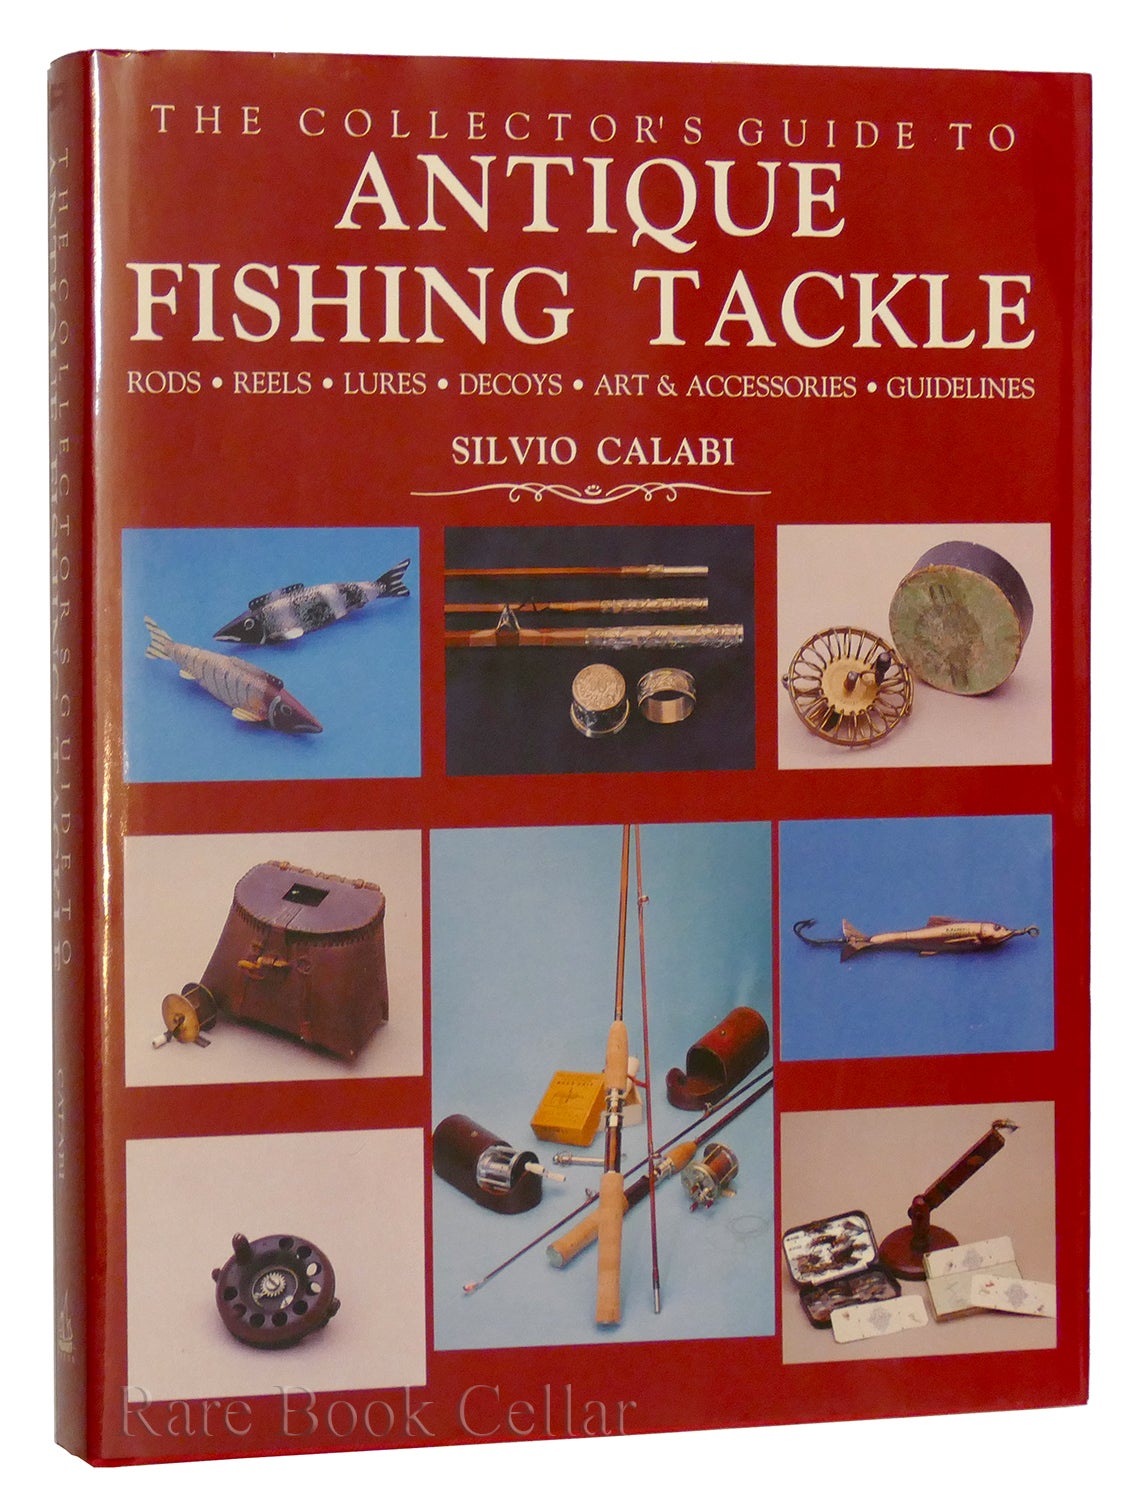 THE COLLECTORS GUIDE TO ANTIQUE FISHING TACKLE by Silvio Calabi on Rare  Book Cellar